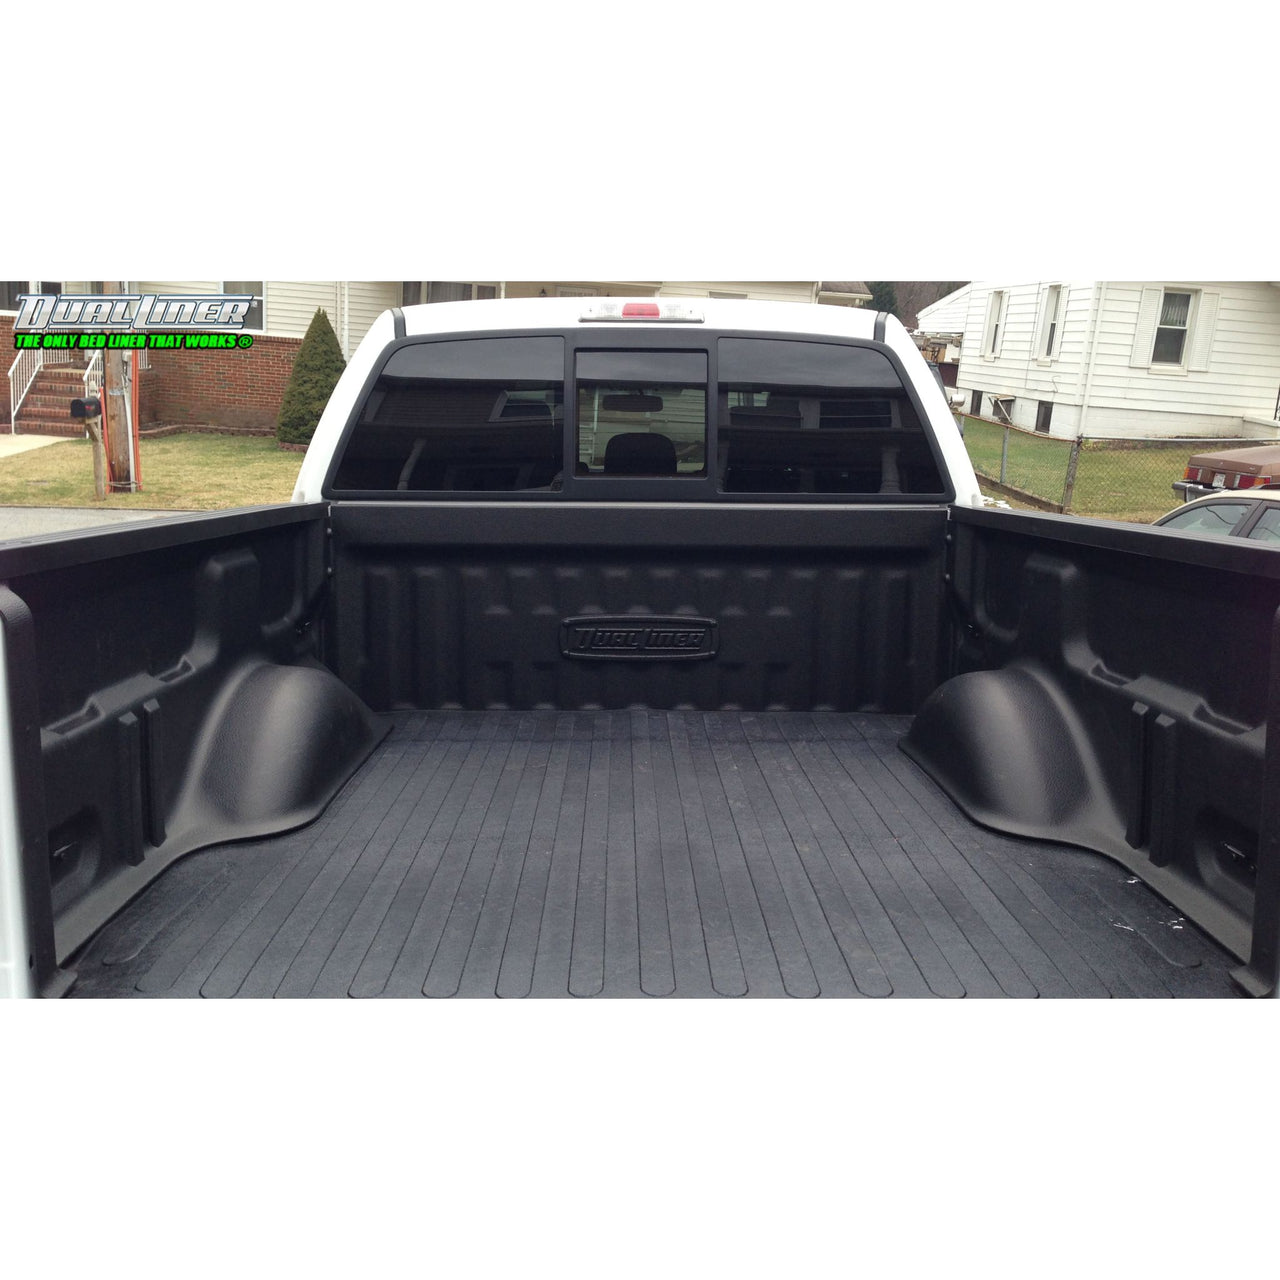 DualLiner 2021 to 2022 F-150 (no LED Light Bar, WITH Tailgate Work Surface) - Long 8' Bed